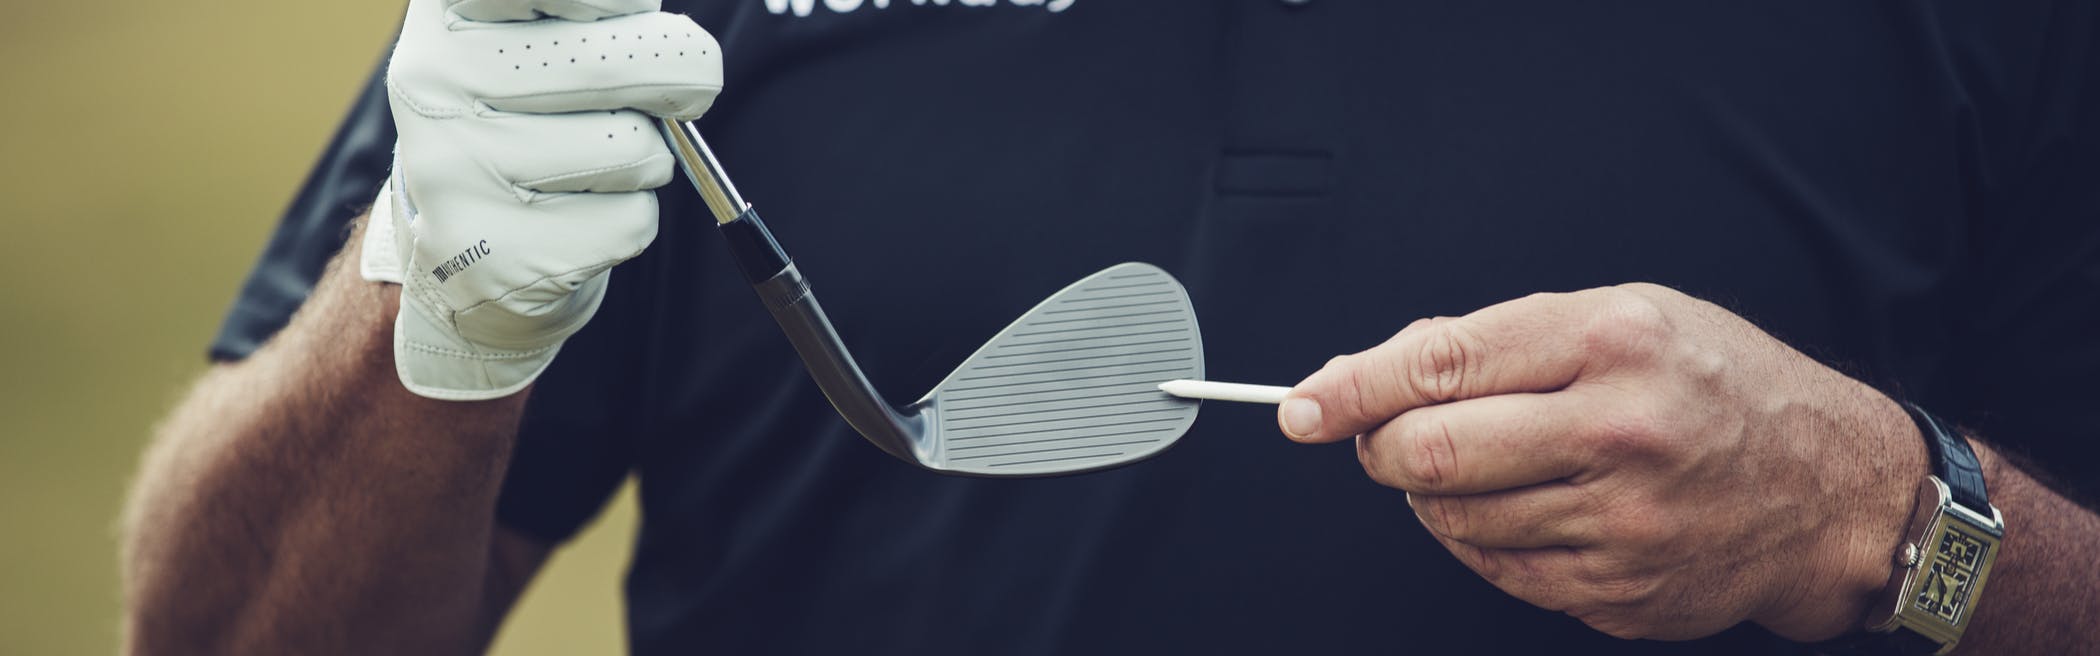 A man holds a wedge in his hand and points to the grooves.